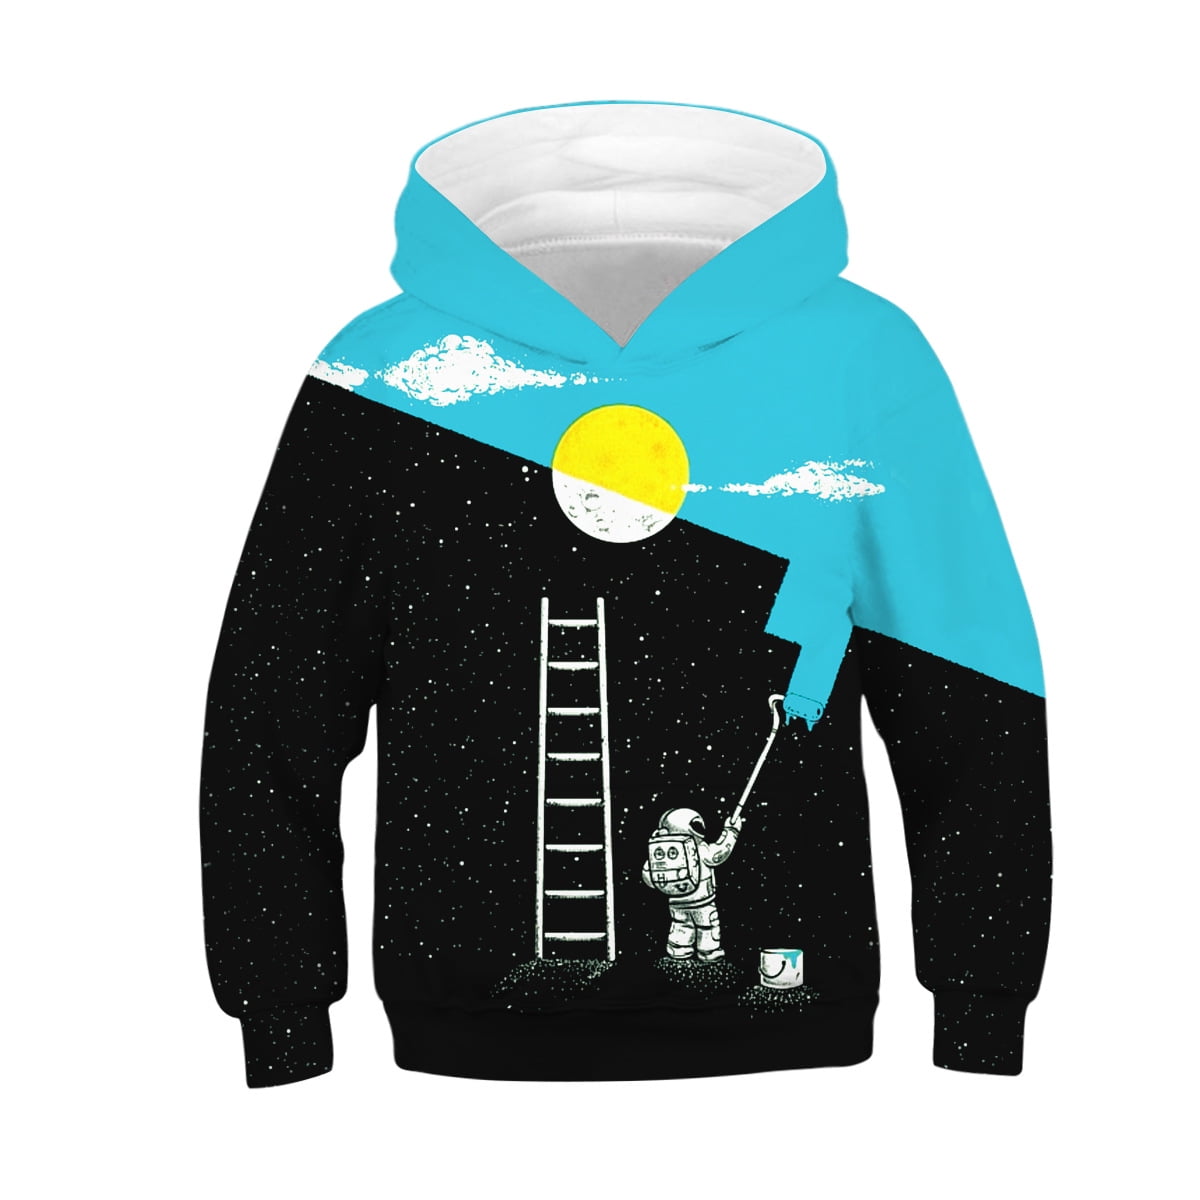 A for Adley Hoodies - To Moon Girls Space Astronaut Hoodie Set For Kids